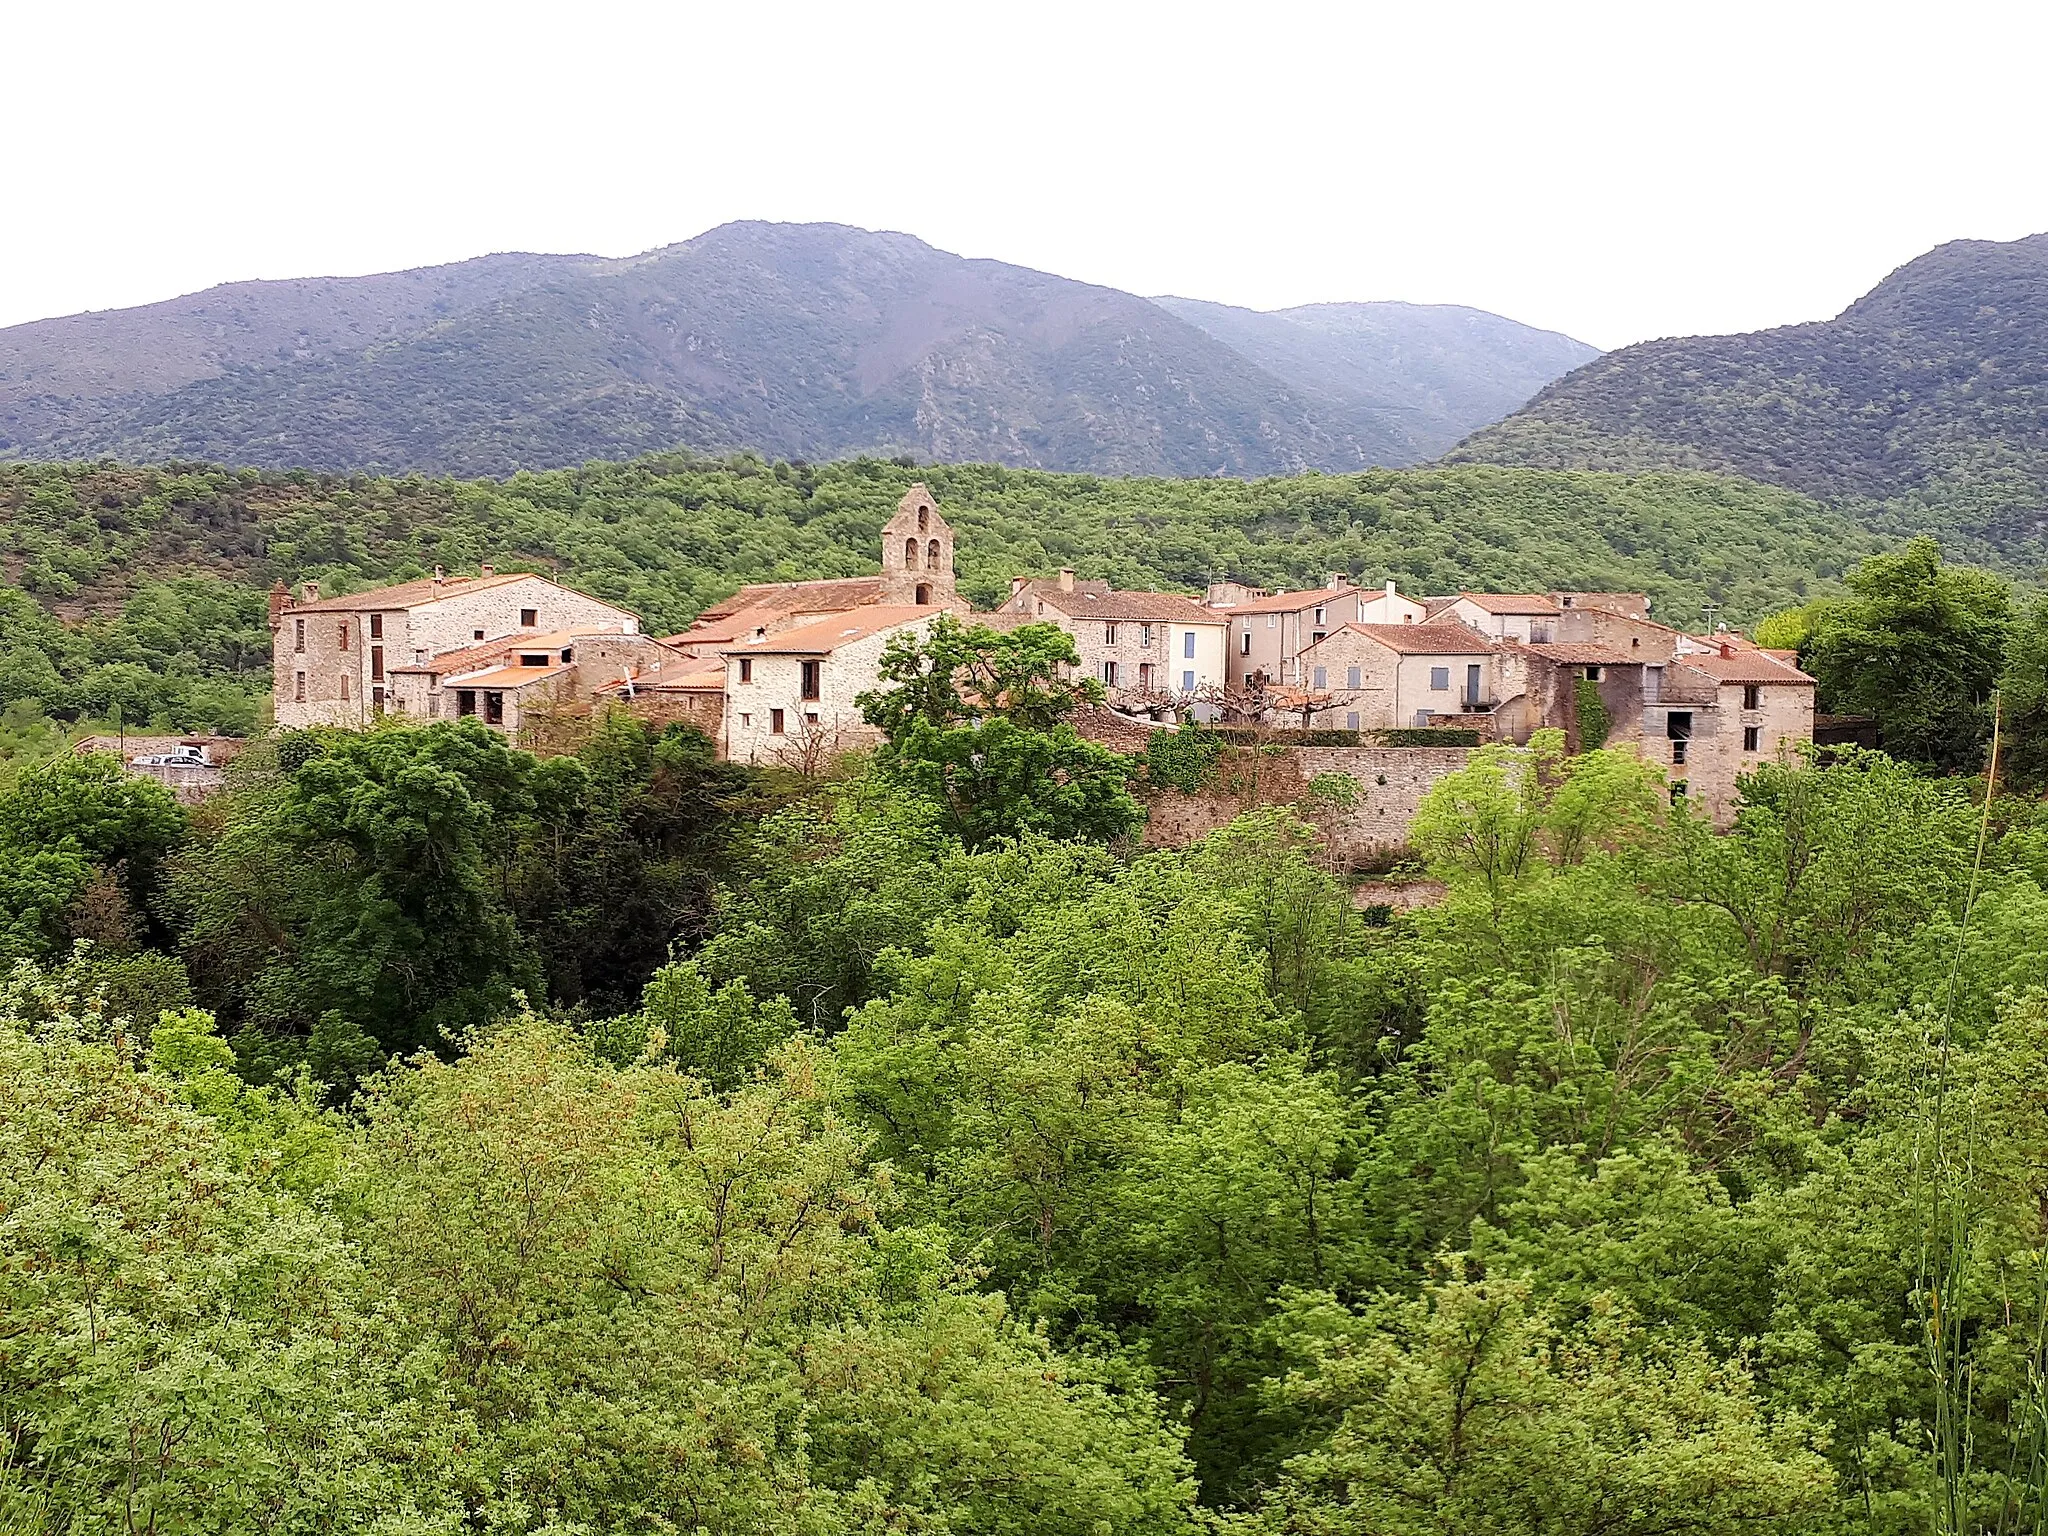 Photo showing: The village of Espira-de-Conflent, Pyrénées-Orientales, France, seen from the west